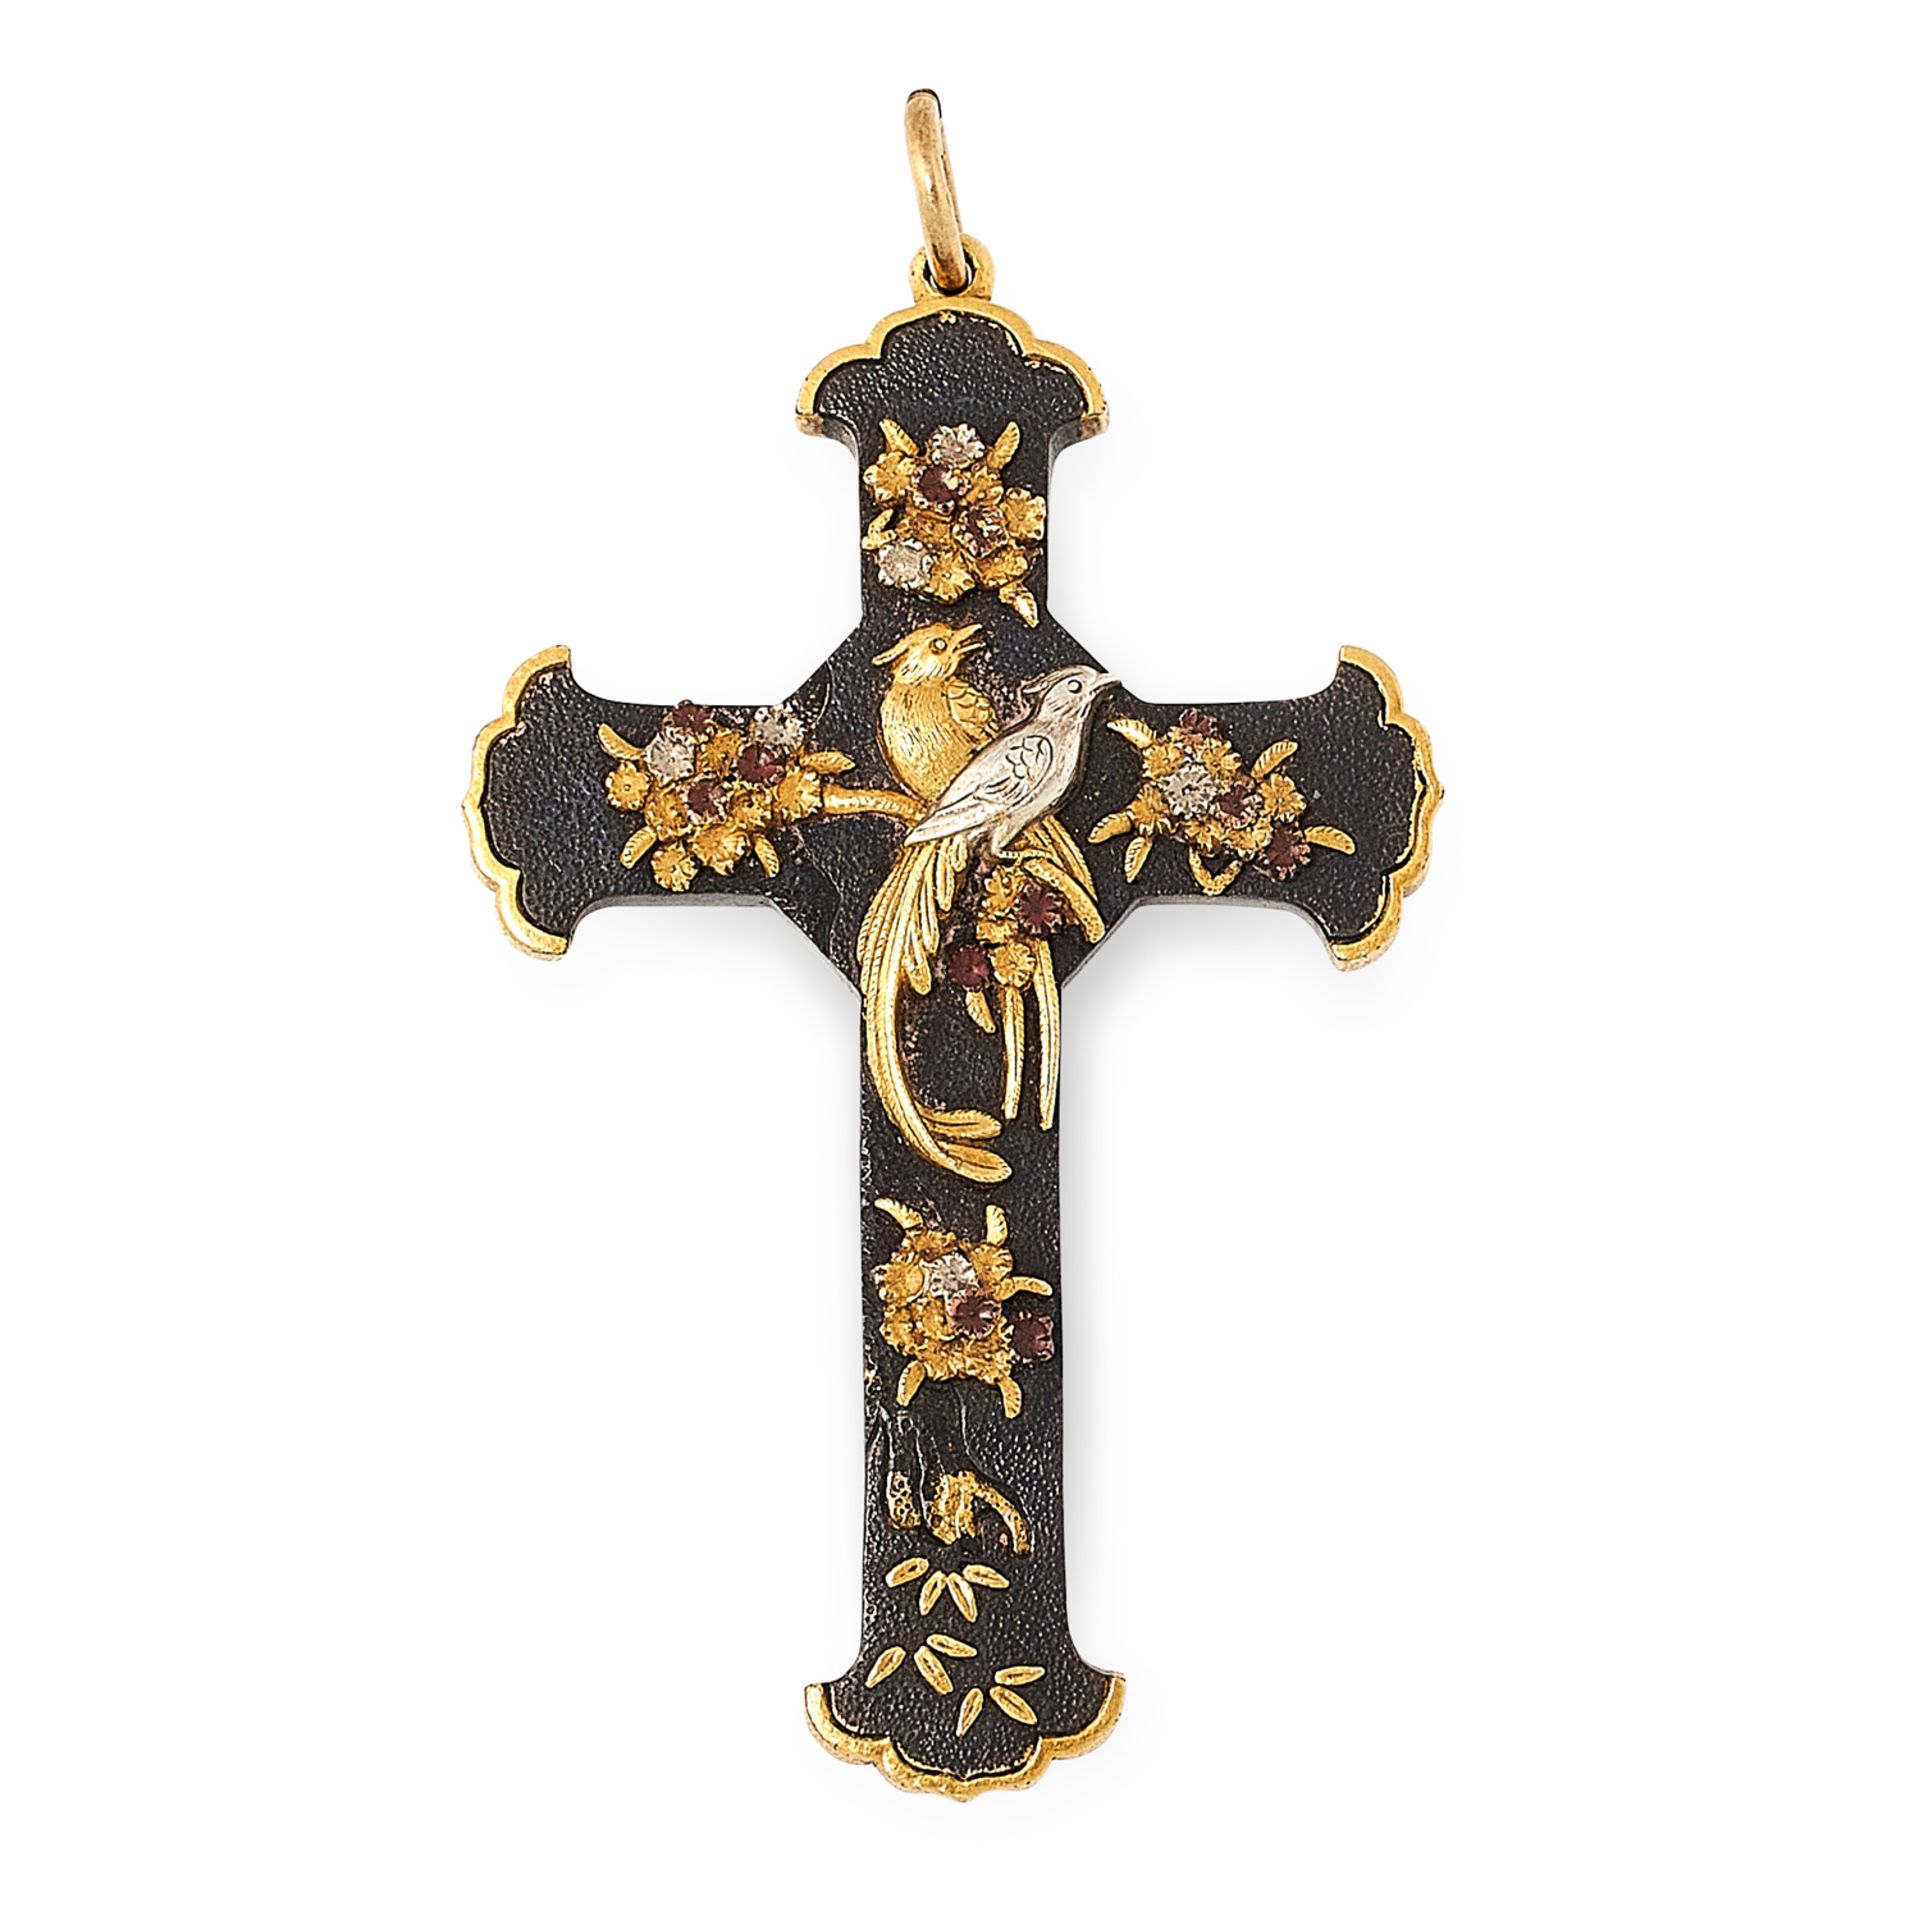 AN ANTIQUE JAPANESE SHAKUDO CROSS PENDANT, EARLY 20TH CENTURY designed as a cross, with applied